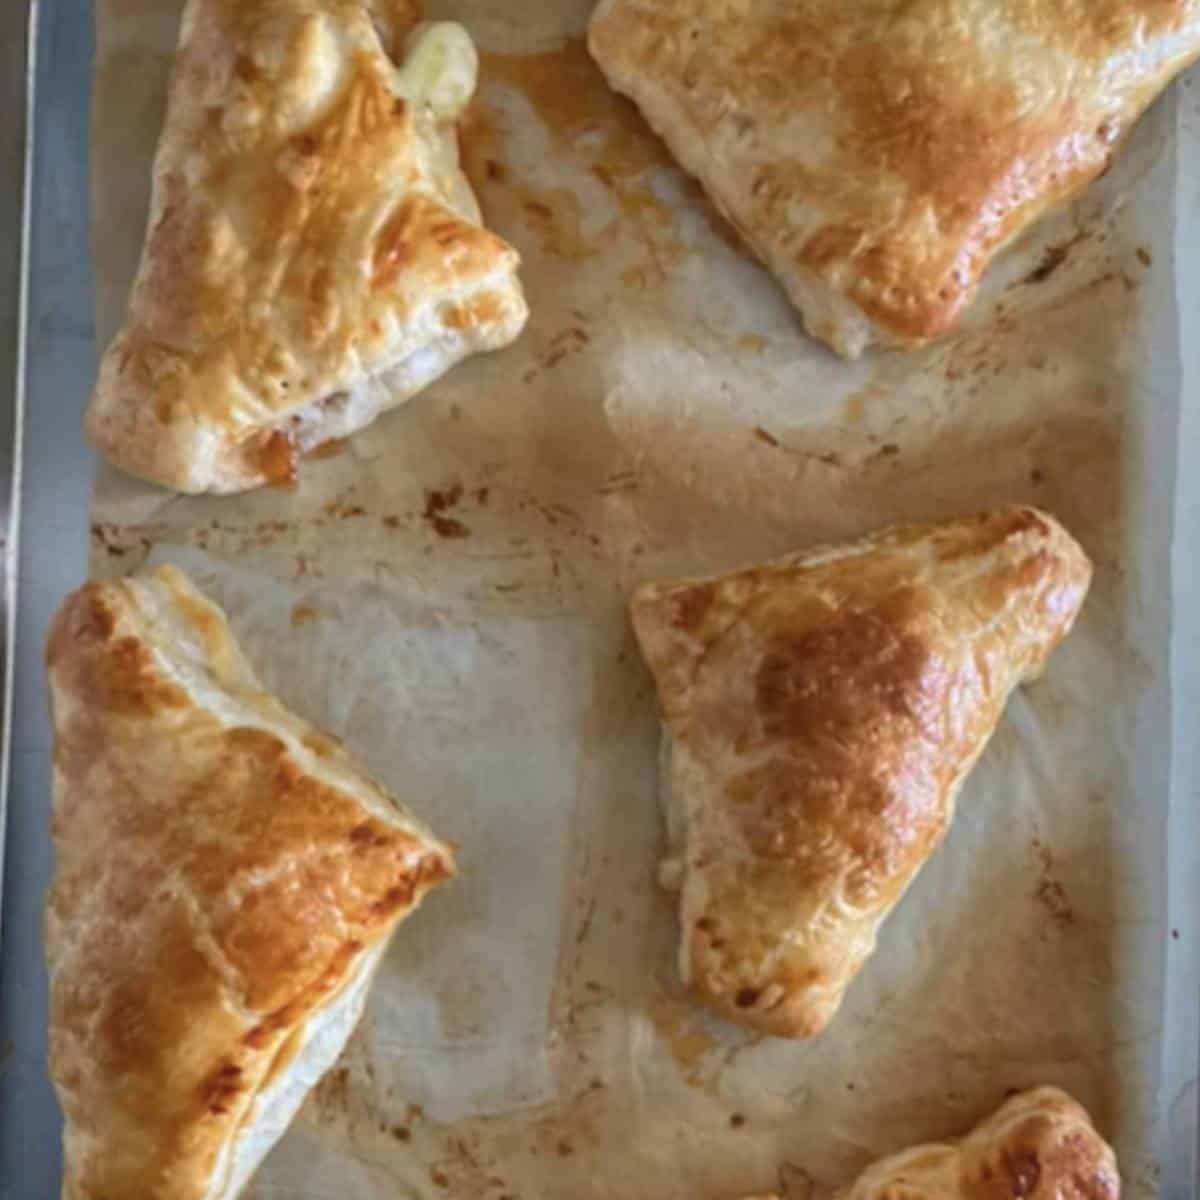 Baked bacon cheese turnovers on cookie sheet.